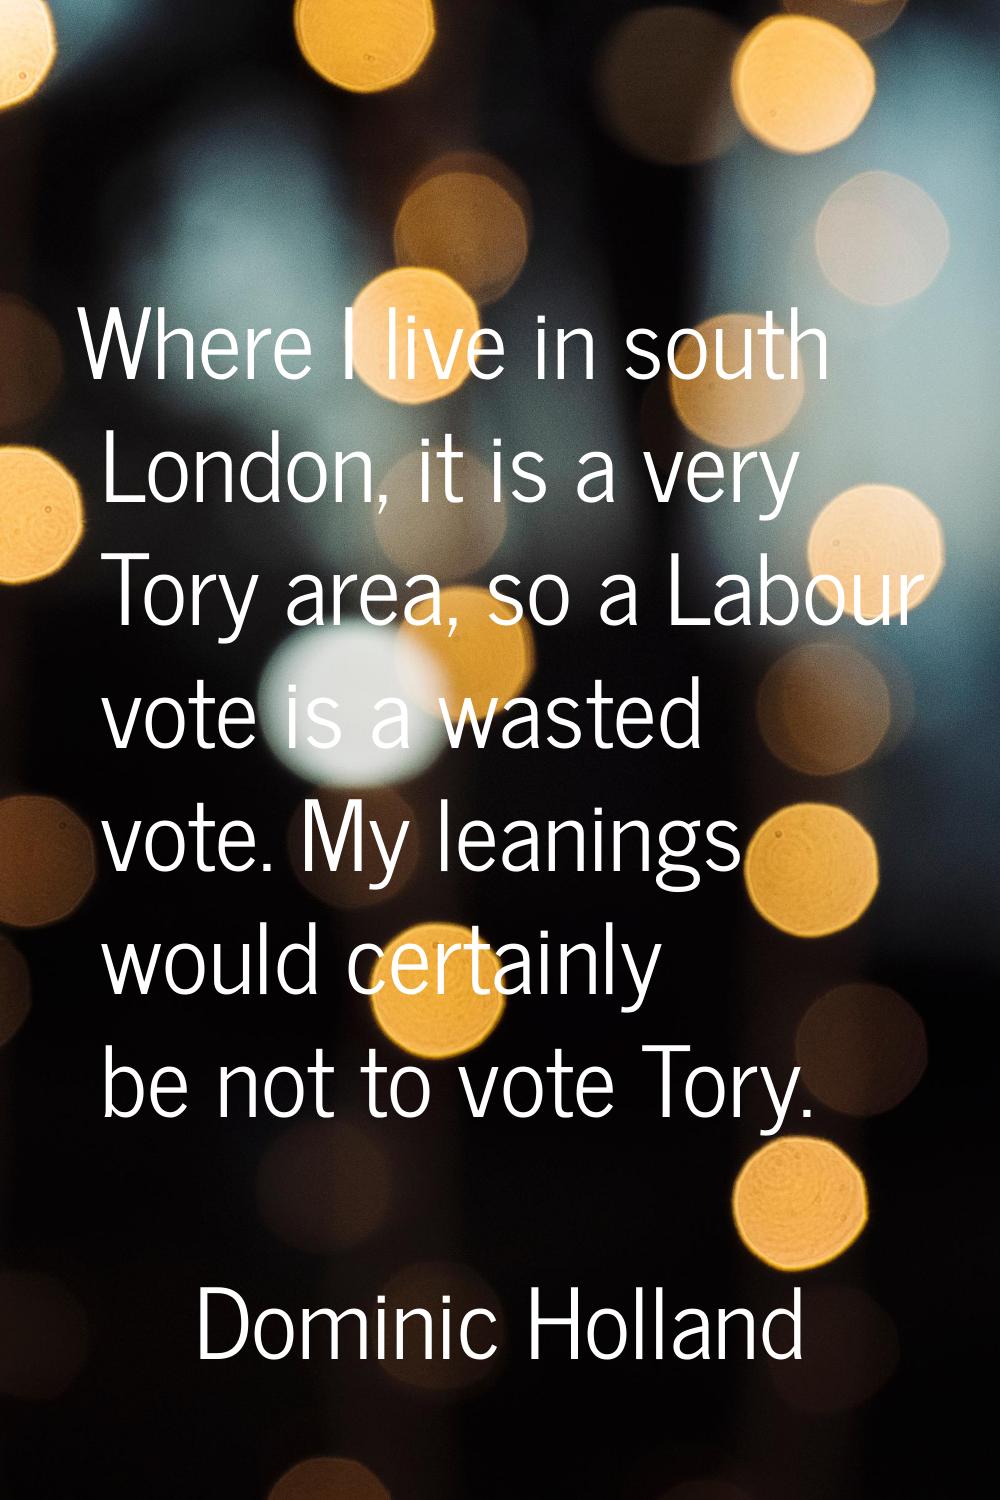 Where I live in south London, it is a very Tory area, so a Labour vote is a wasted vote. My leaning